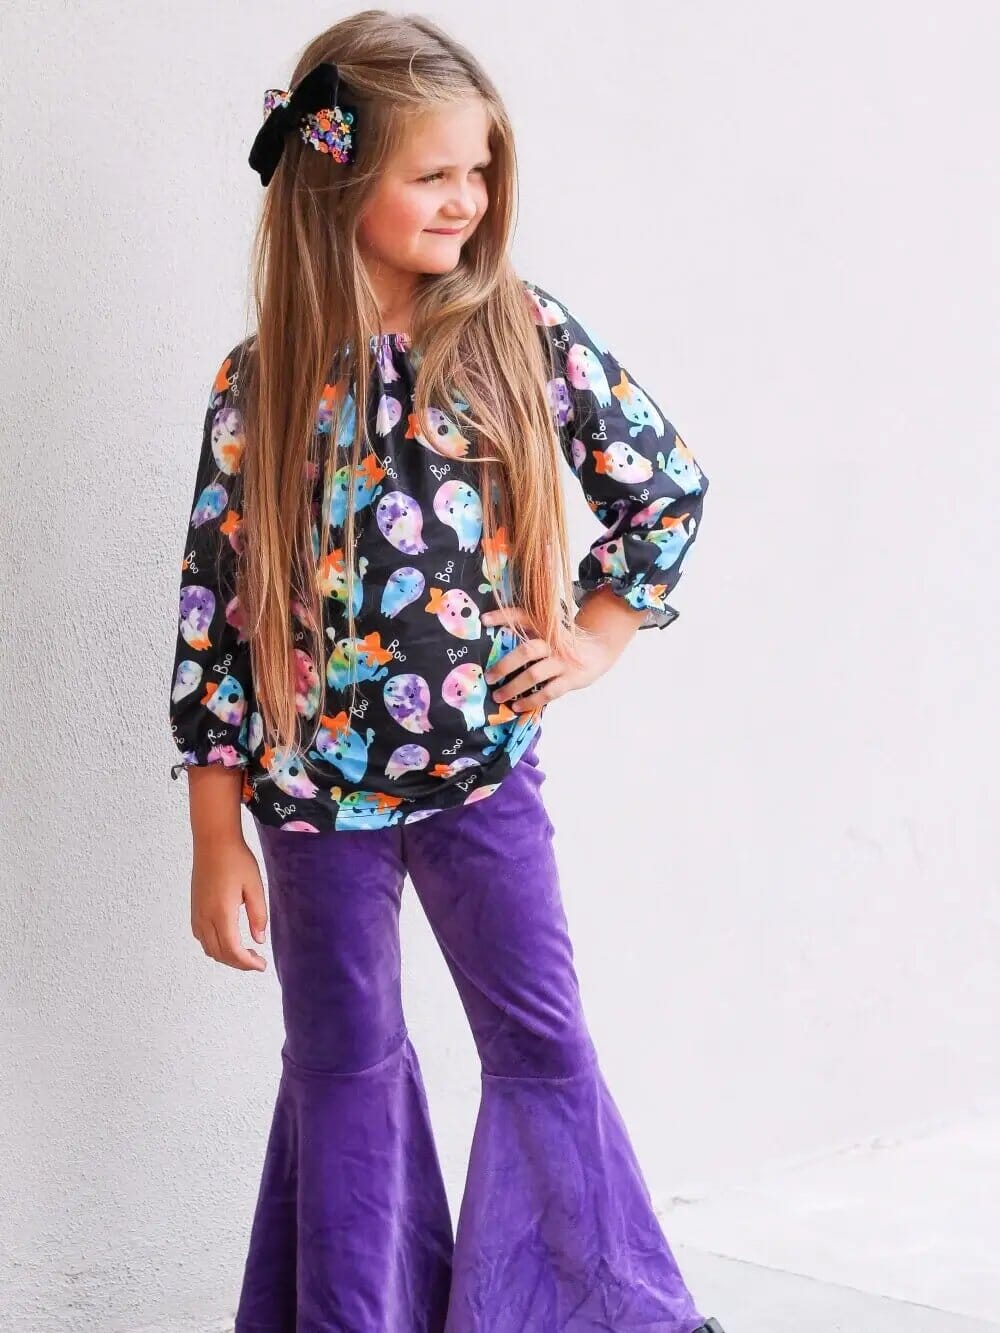 Halloween Outfits, Dresses, Costumes, & More for Toddlers & Little Girls